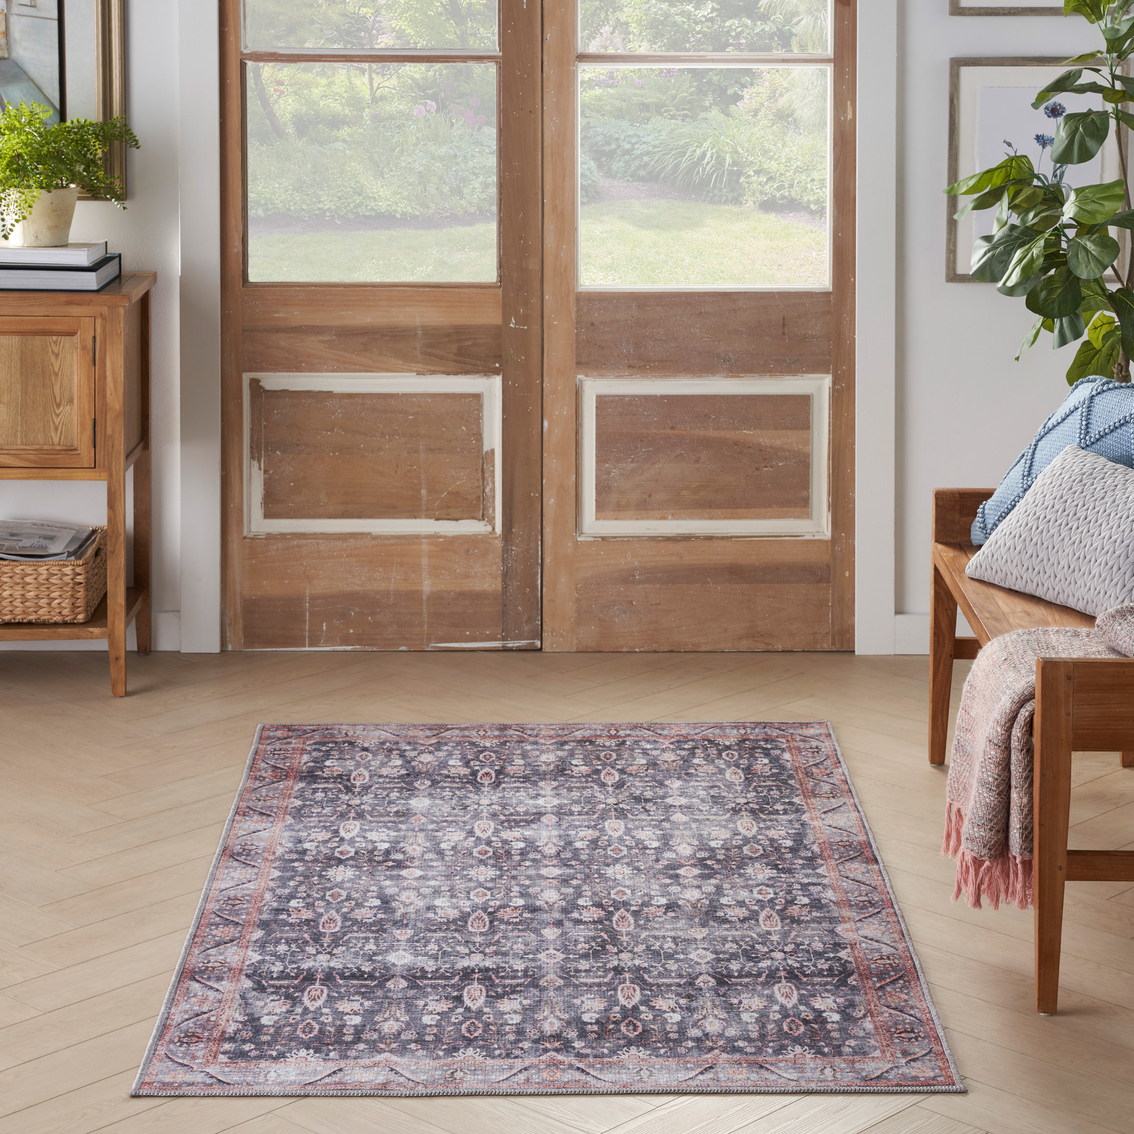 Nourison Grand Washables Persian Area Rug - Image 3 of 9